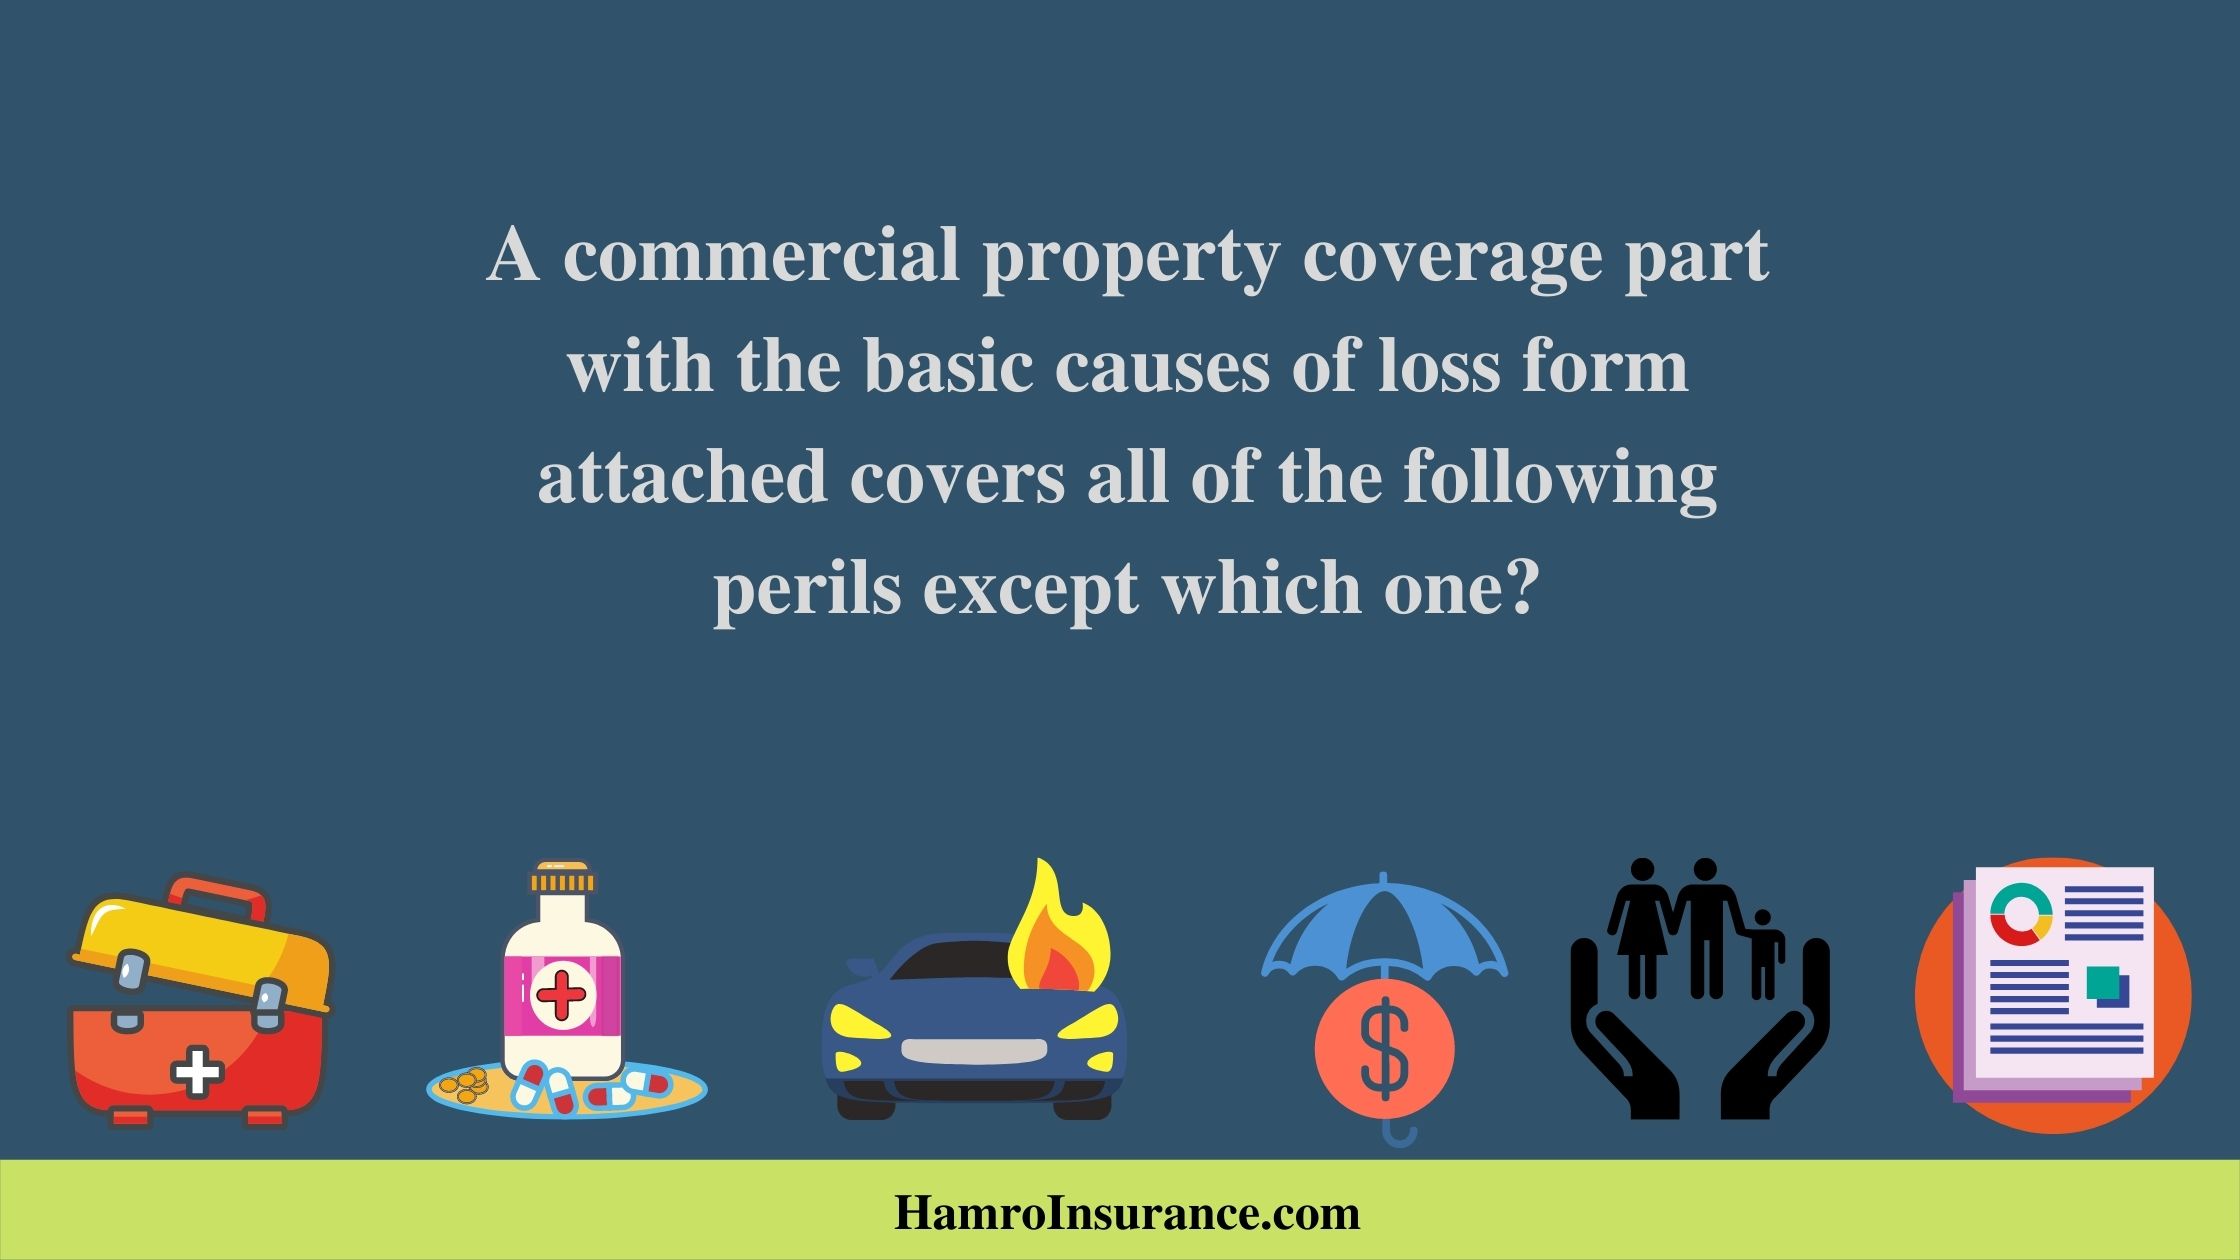 A commercial property coverage part with the basic causes of loss form attached covers all of the following perils except which one?